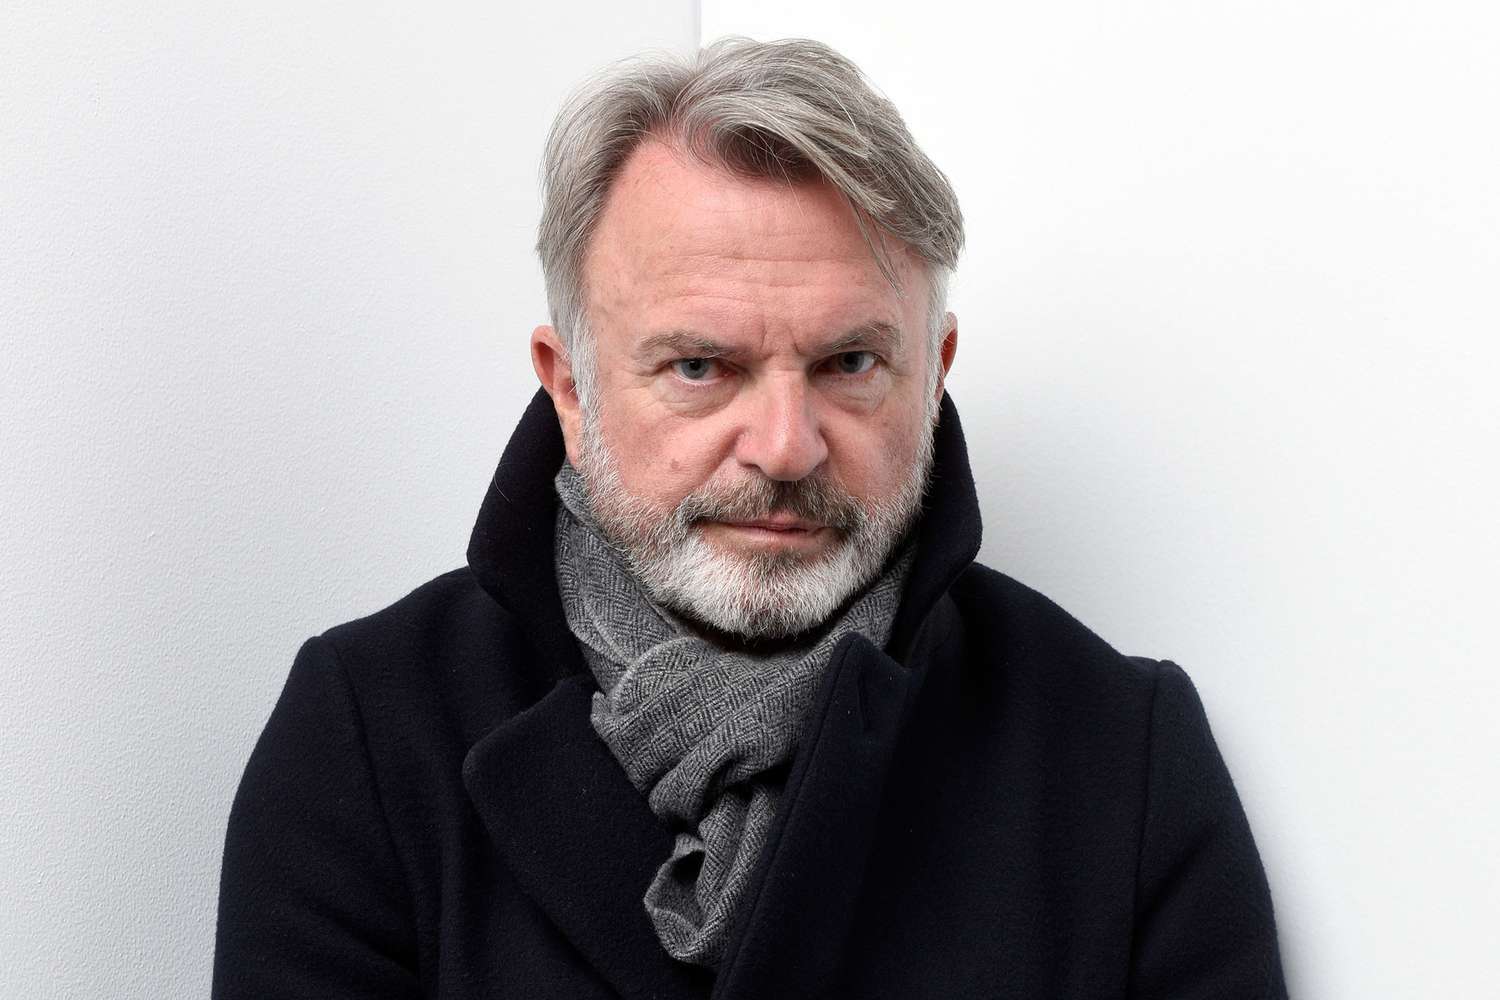 Actor Sam Neill from the film "Hunt for the Wilderpeople" poses for a portrait during the WireImage Portrait Studio hosted by Eddie Bauer at Village at The Lift on January 22, 2016 in Park City, Utah.